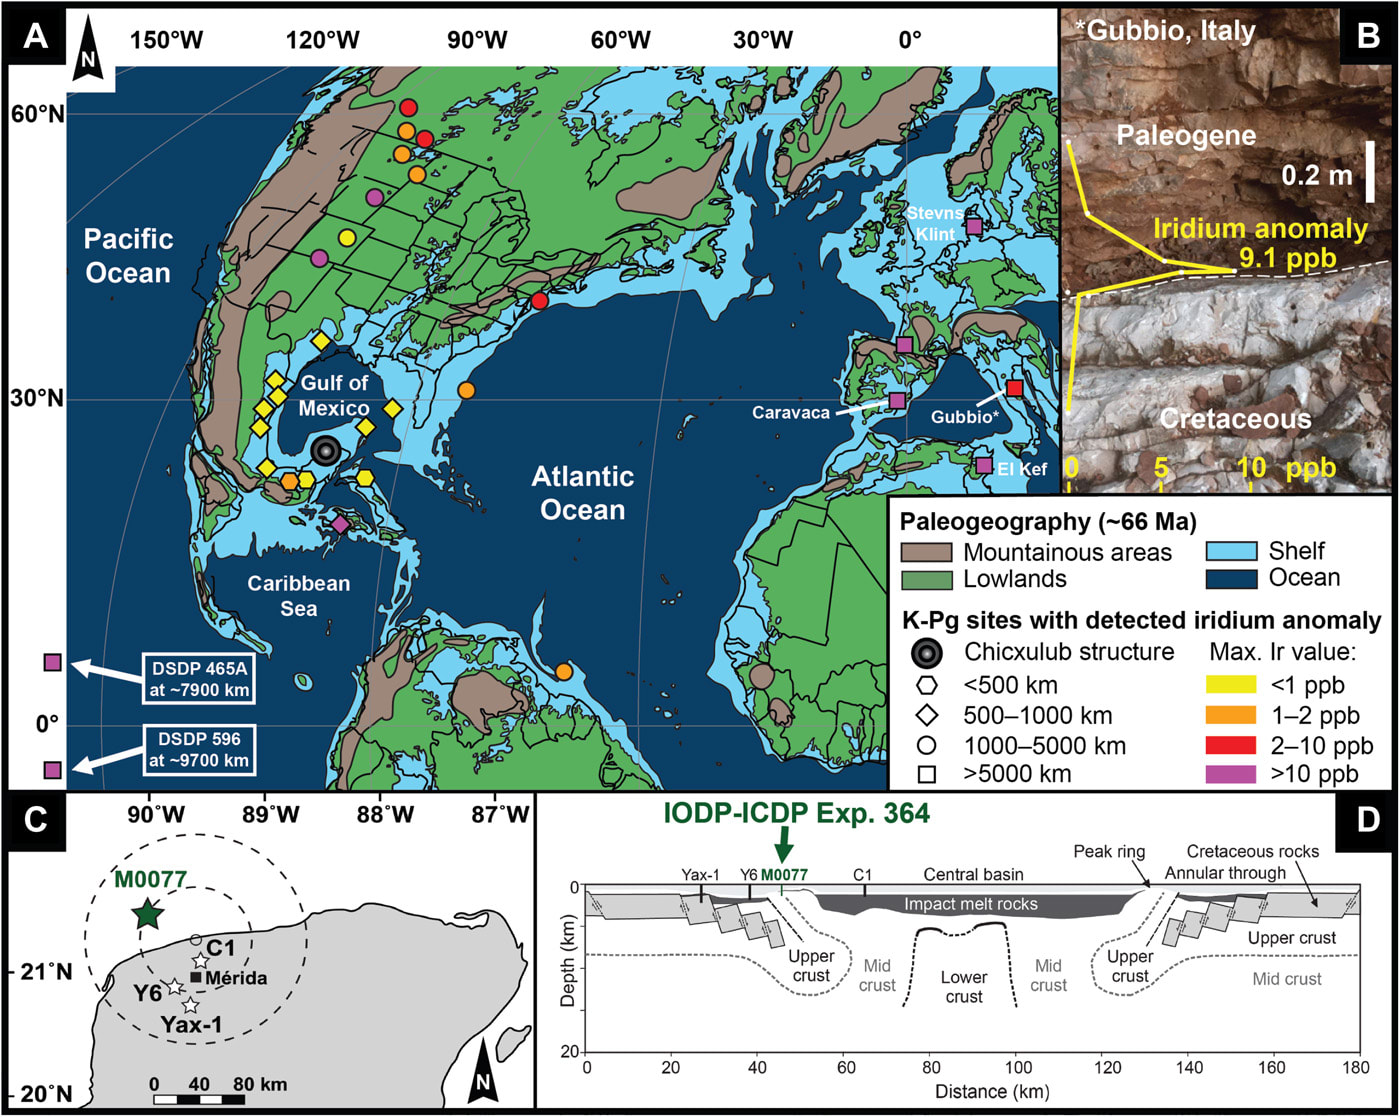 Globally distributed iridium layer preserved within the Chicxulub impact structure